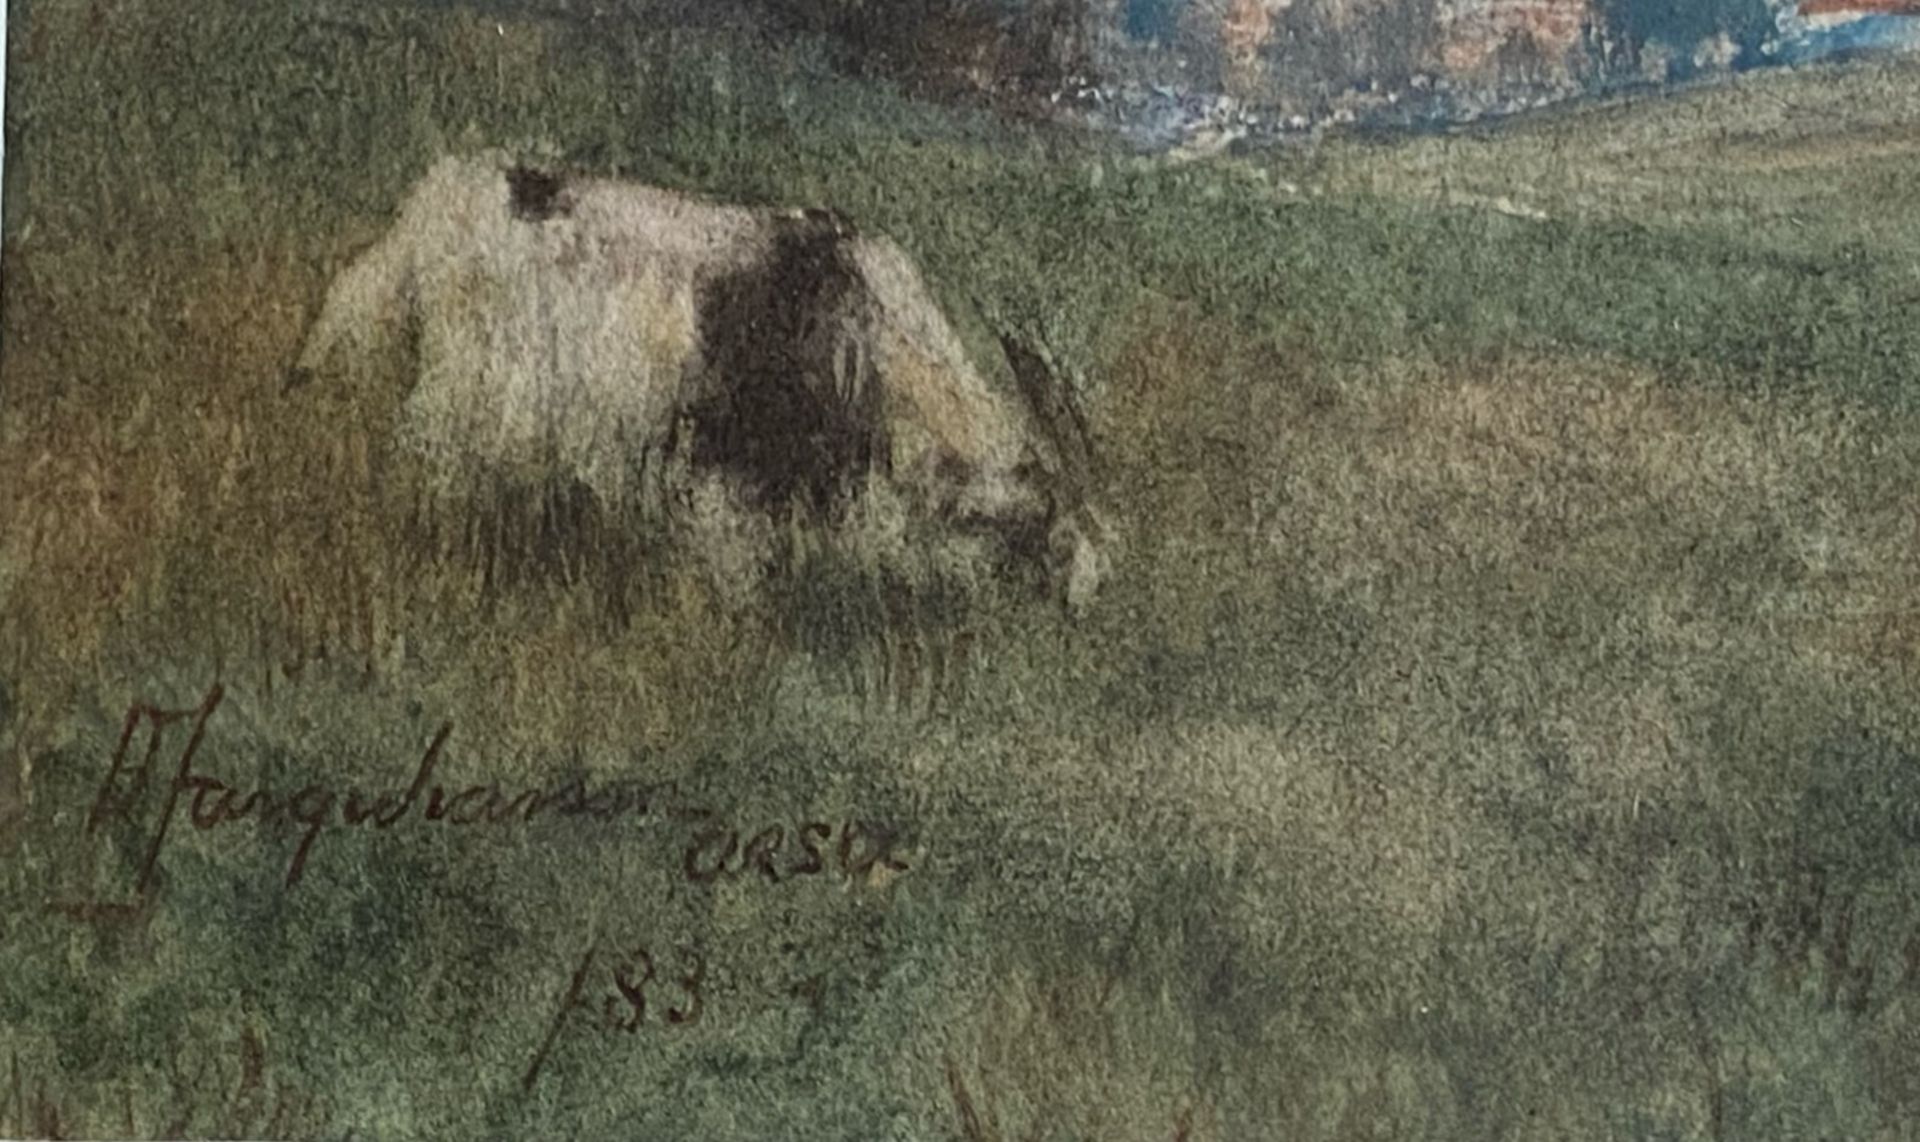 Goats grazing, St cloud overlooking Paris signed watercolour by Scottish artist David Farquharson - Image 3 of 3